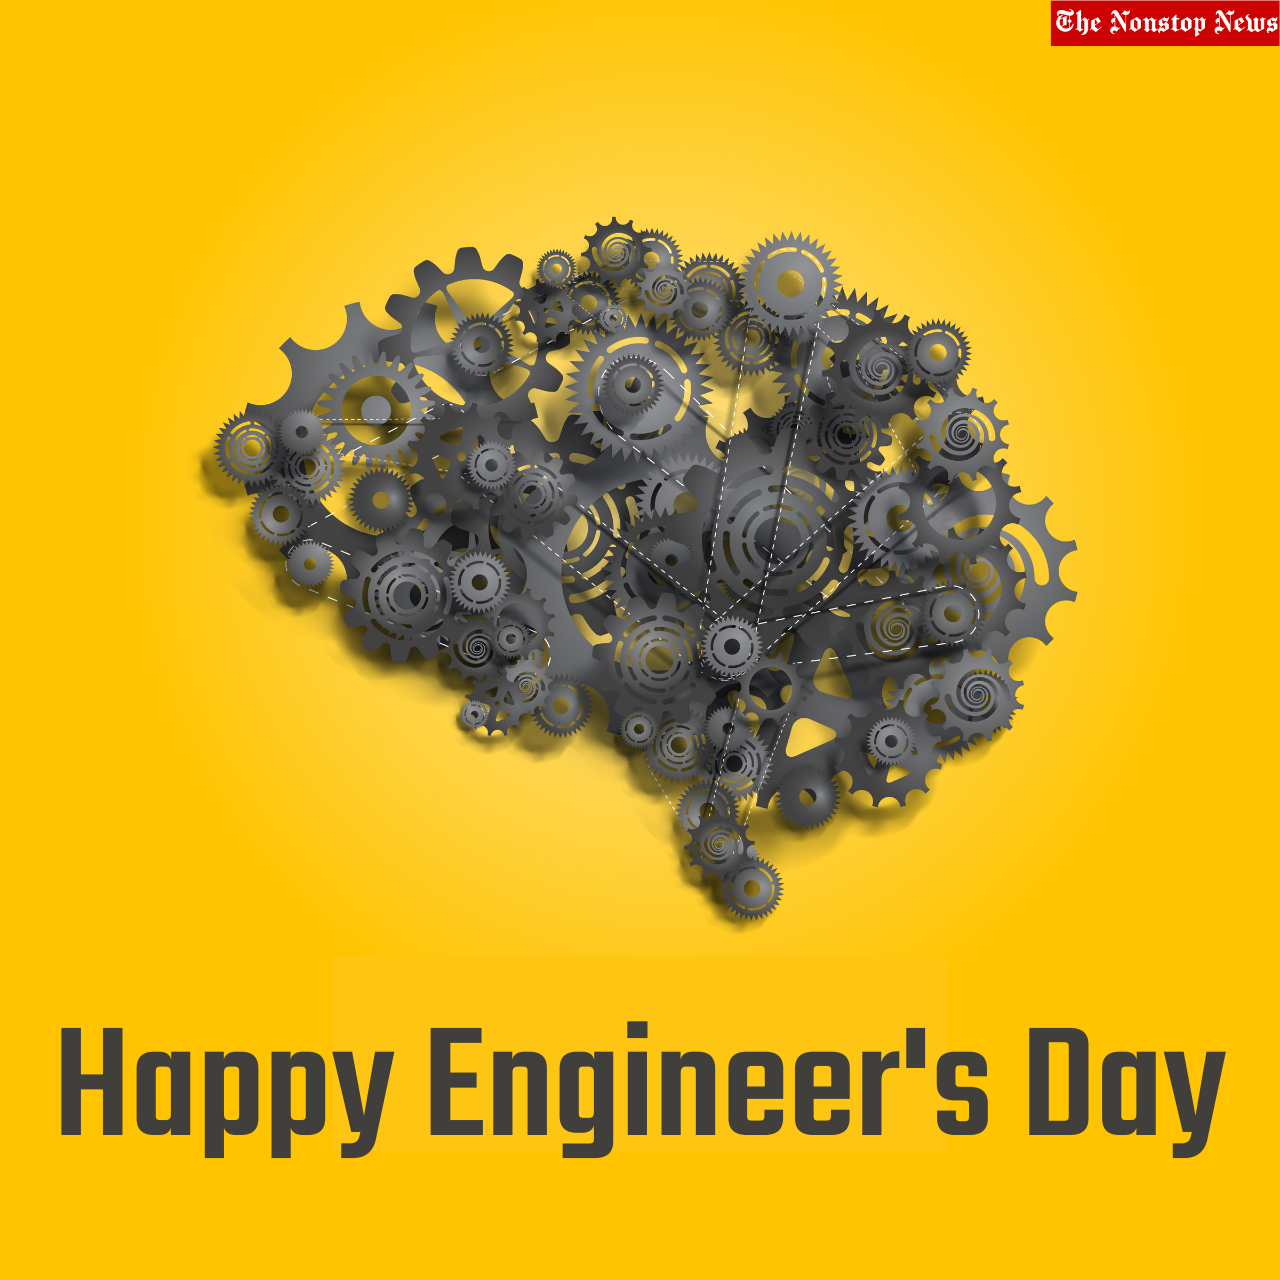 Engineer's Day 2021 Wishes, Quotes, Memes, Messages, HD Images, Poster and Social Media Posts to share